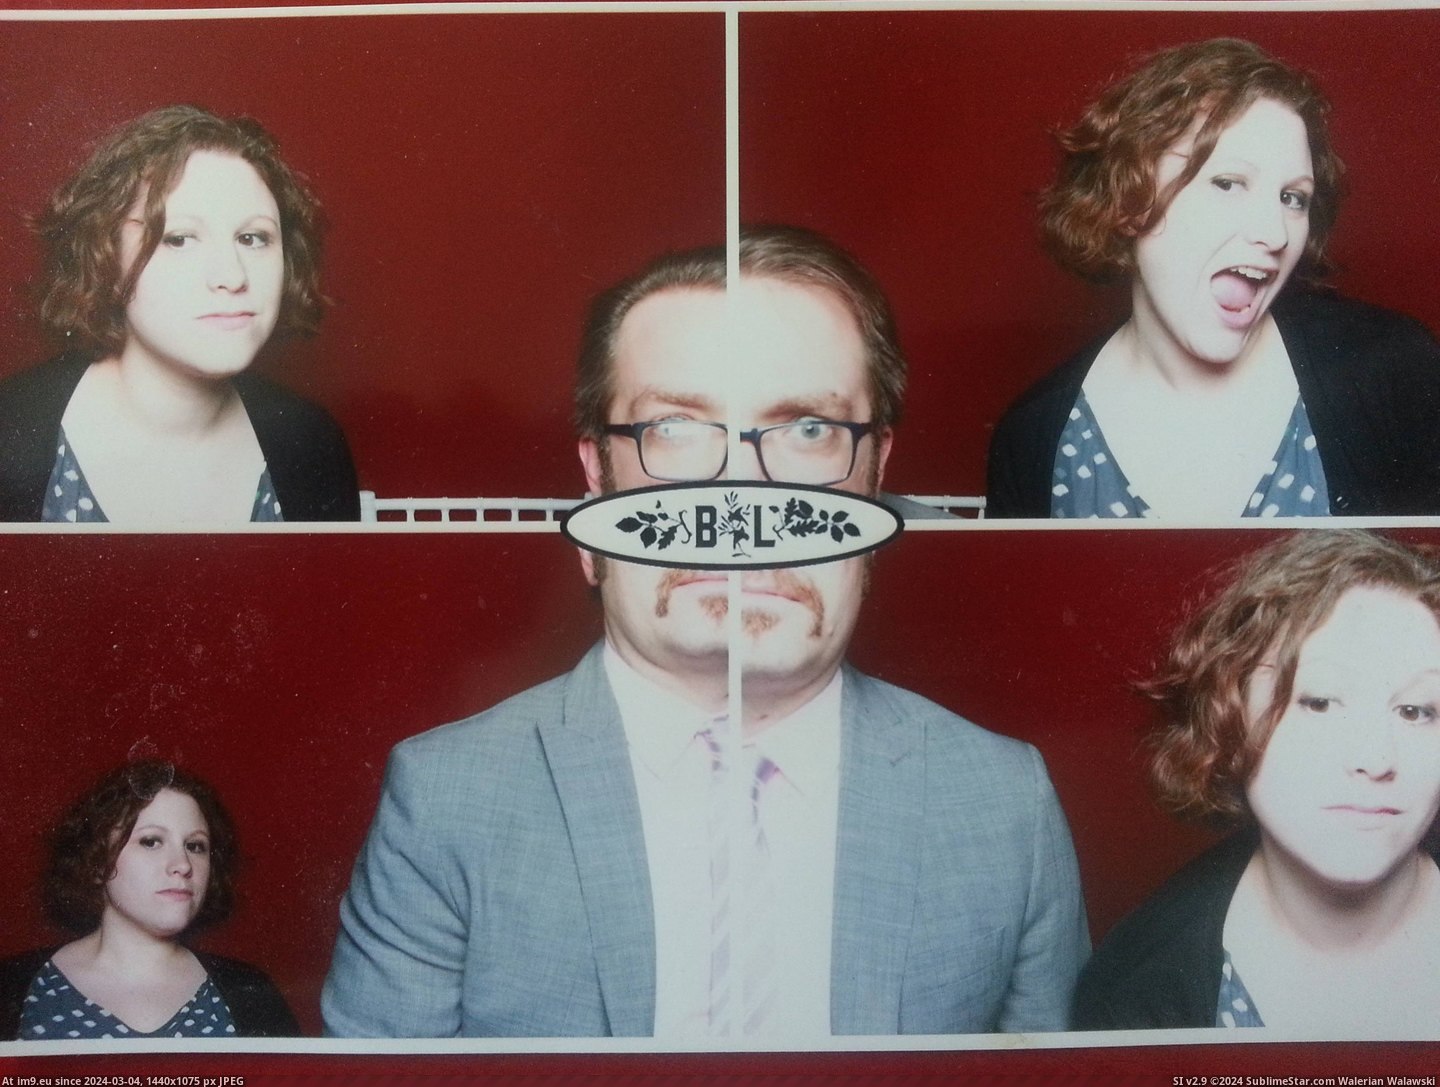 #Series #Wedding #Photobooth #Code #Cracked [Pics] There was a photobooth at a wedding that took a series of four. I cracked the code. Pic. (Изображение из альбом My r/PICS favs))